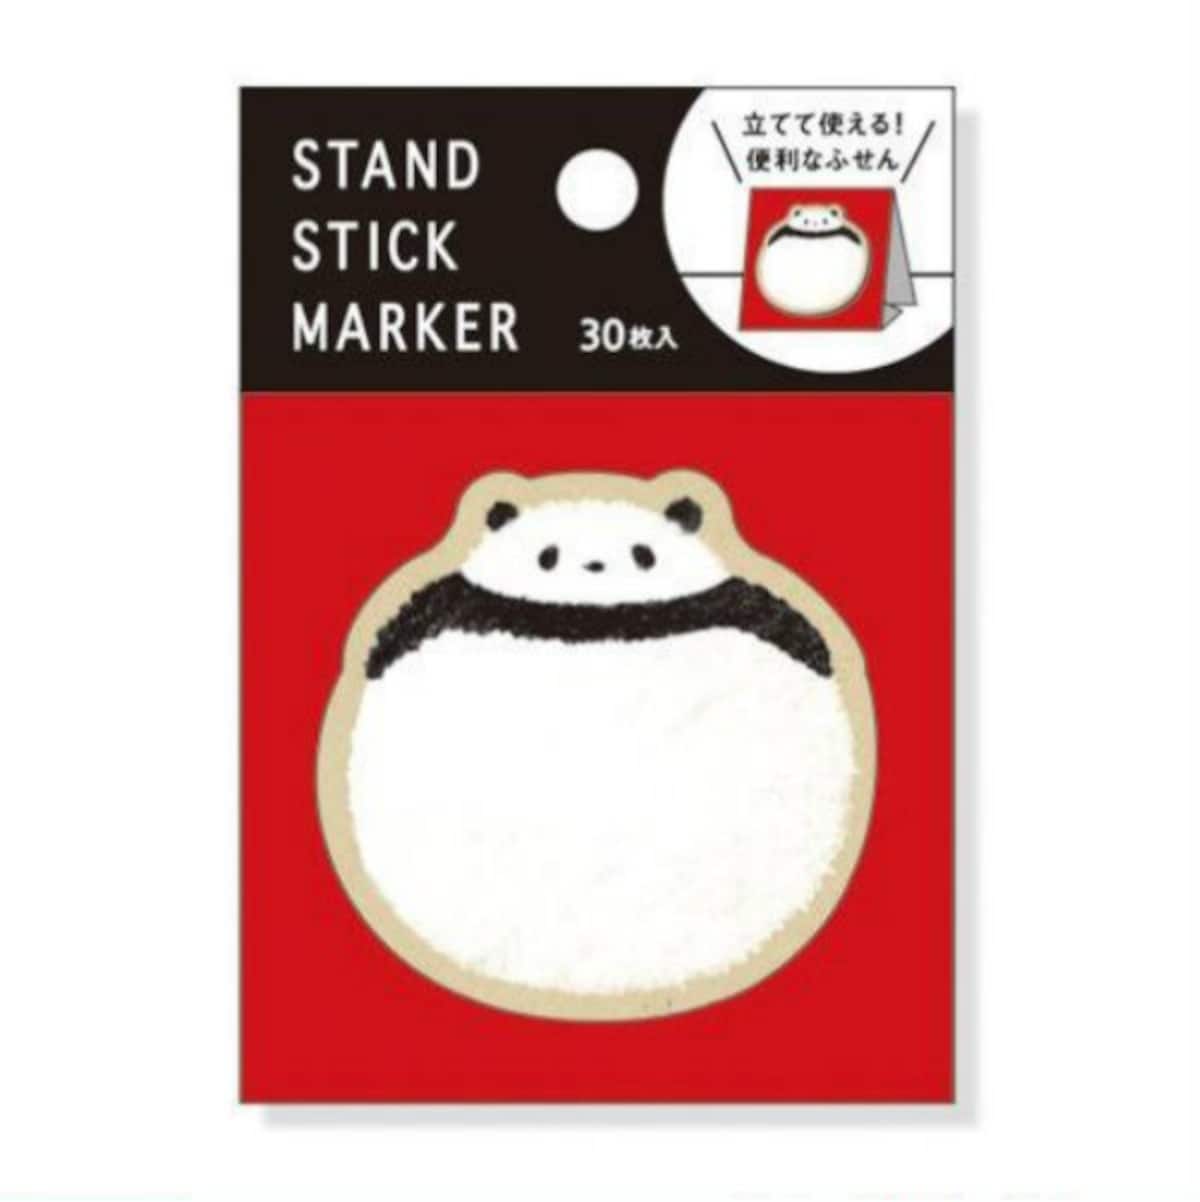 8. Panda Sticky Notes with Stand (US$4.51)